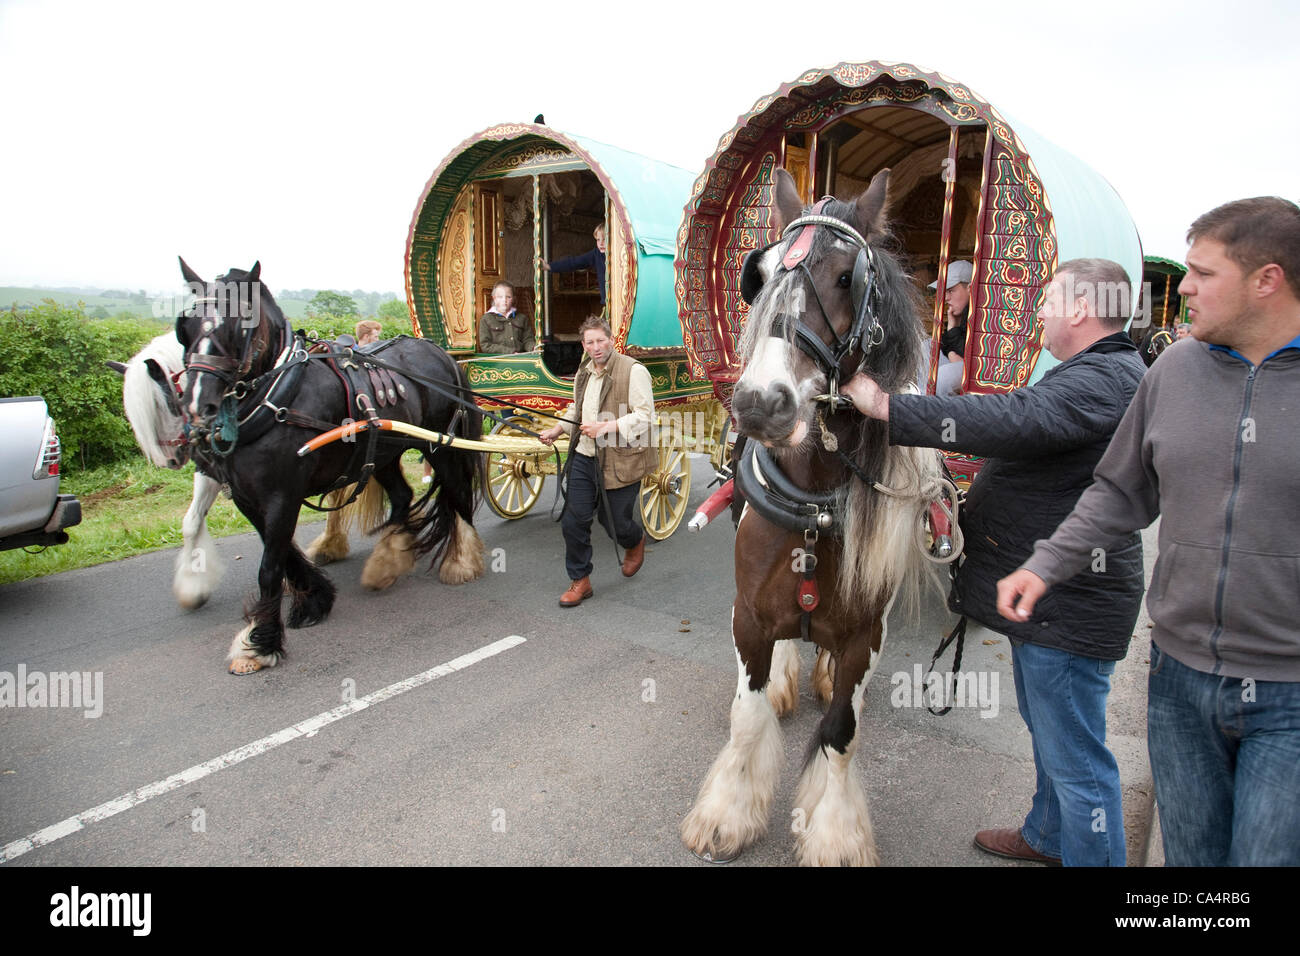 Thursday 7th June 2012 at Appleby, Cumbria, England, UK. Horse drawn bow-top wagons arrive from all over the UK on the first day of the Appleby Fair, the biggest annual gathering of Gypsies and Travellers in Europe.  The fair takes place 7th-13th June 2012. Stock Photo